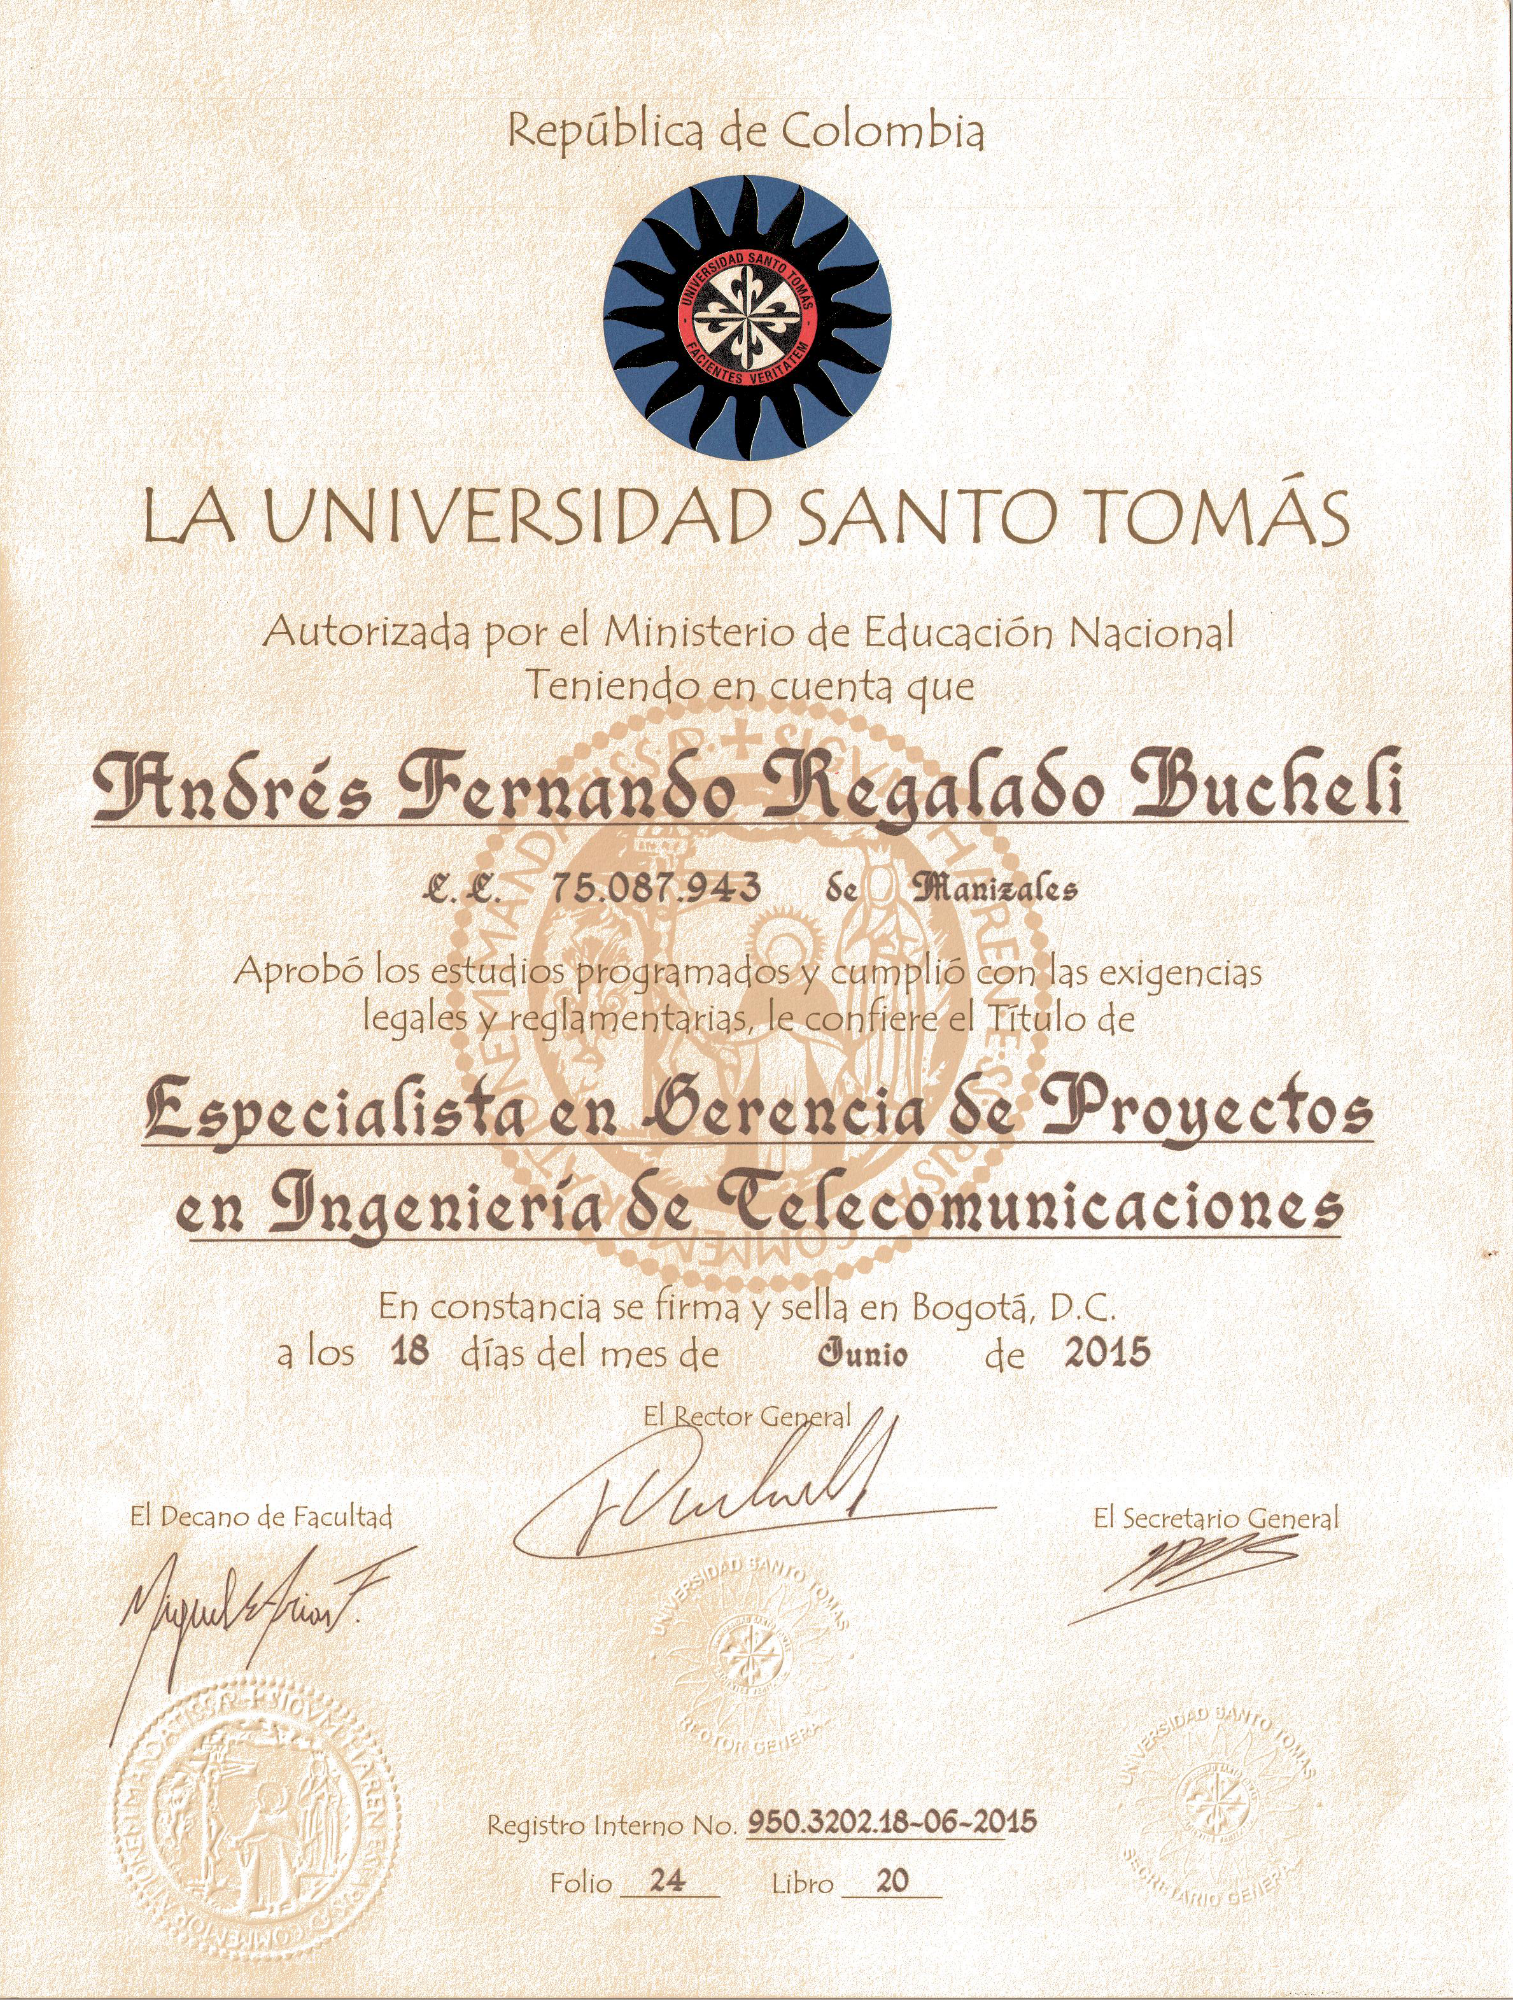 Photo of certificate